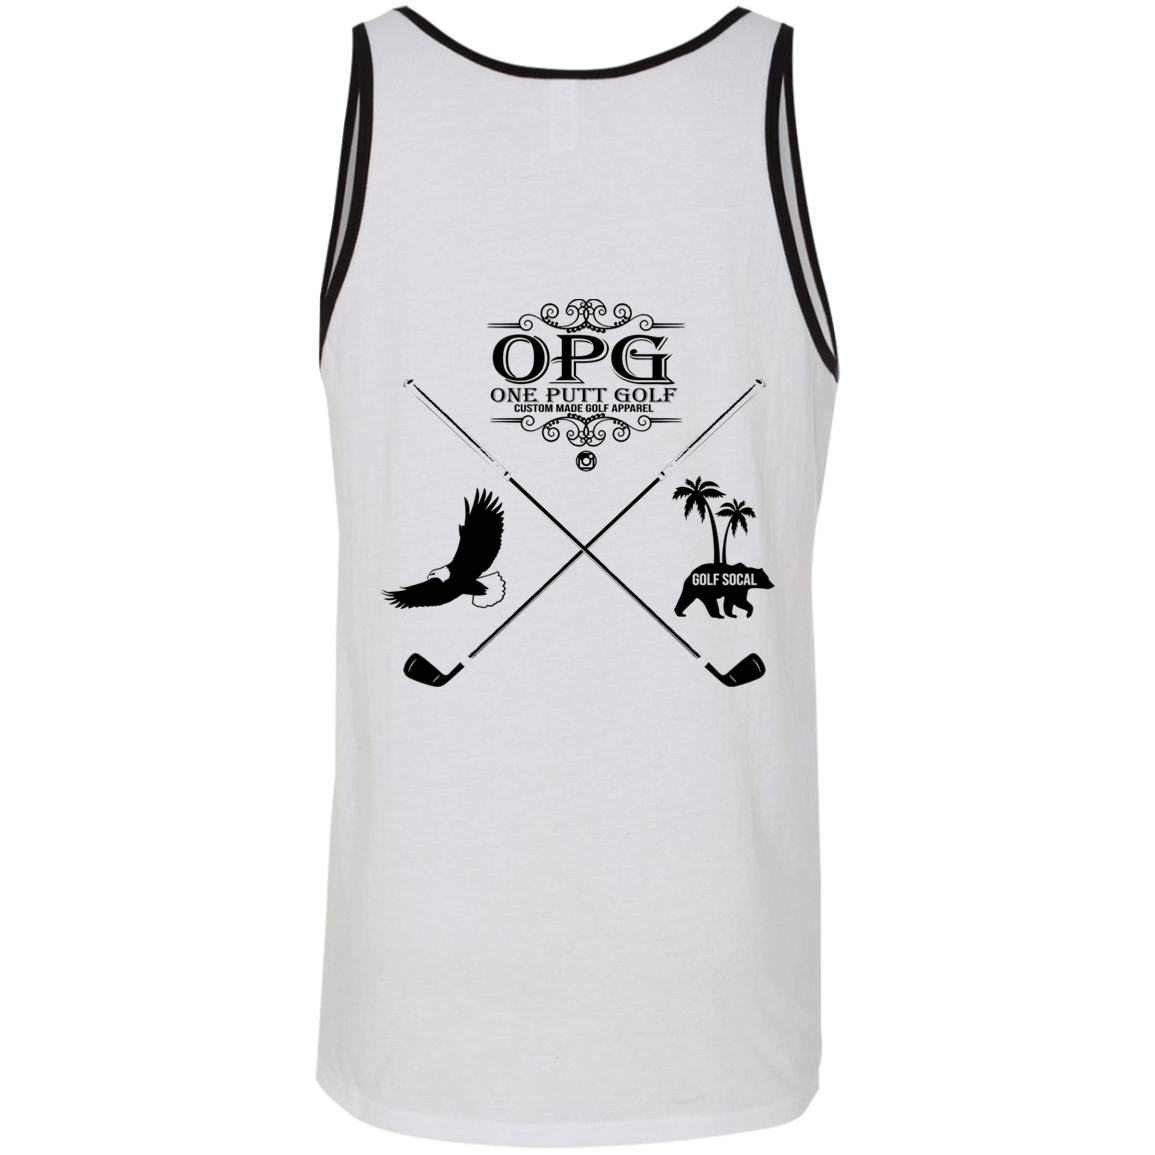 OPG Custom Design #8. Drive. 2 Tone Tank 100% Combed and Ringspun Cotton